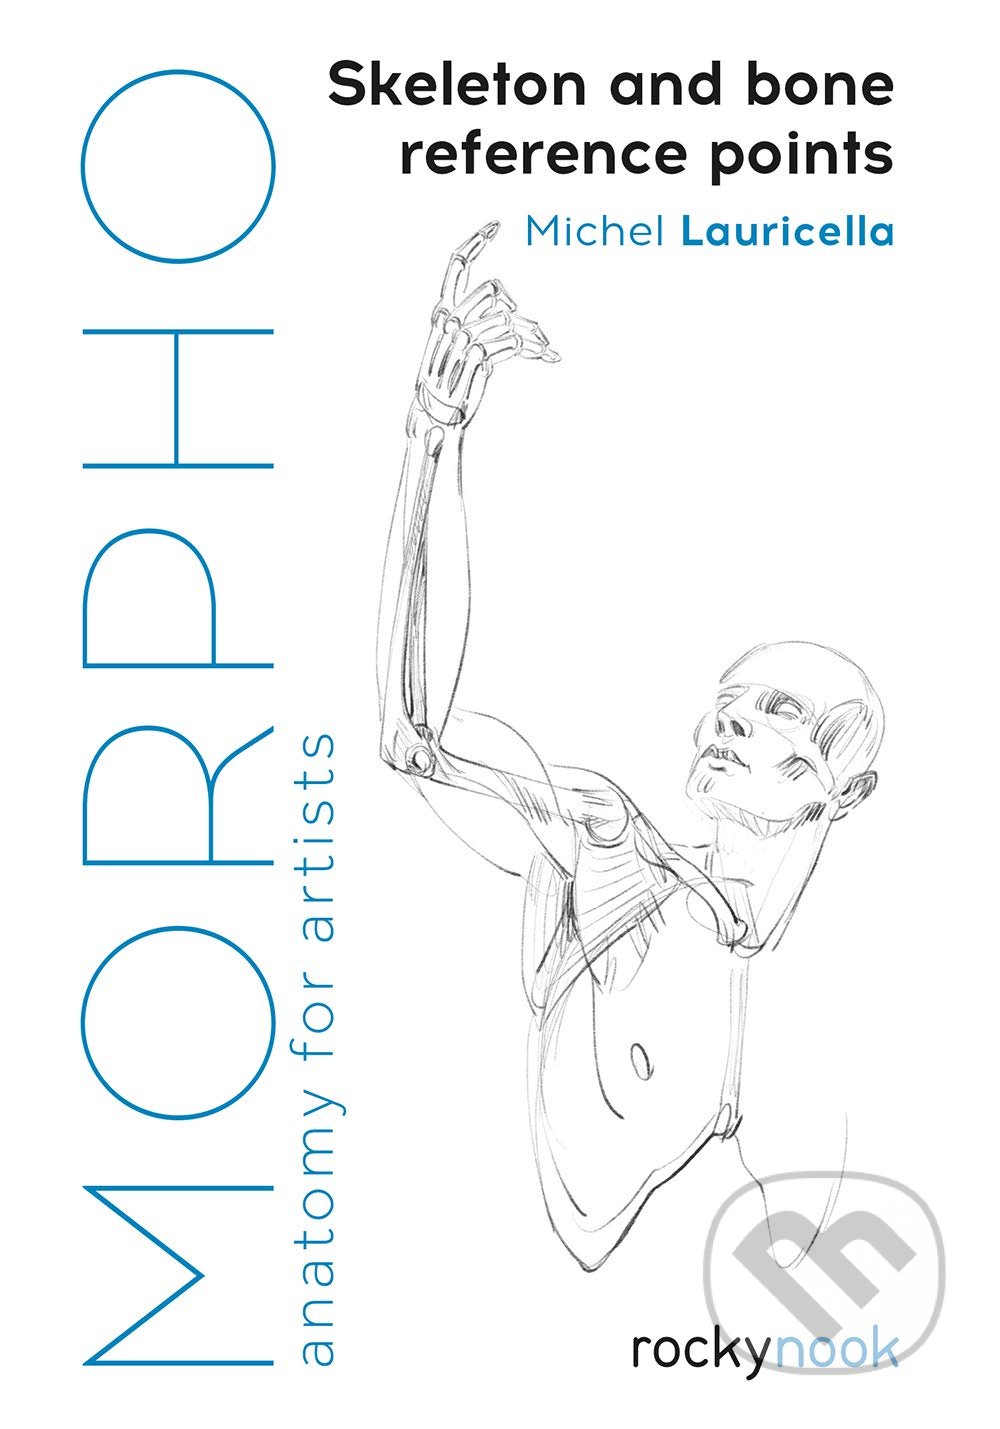 Morpho: Skeleton and Bone Reference Points - Michel Lauricella, Rocky Nook, 2019